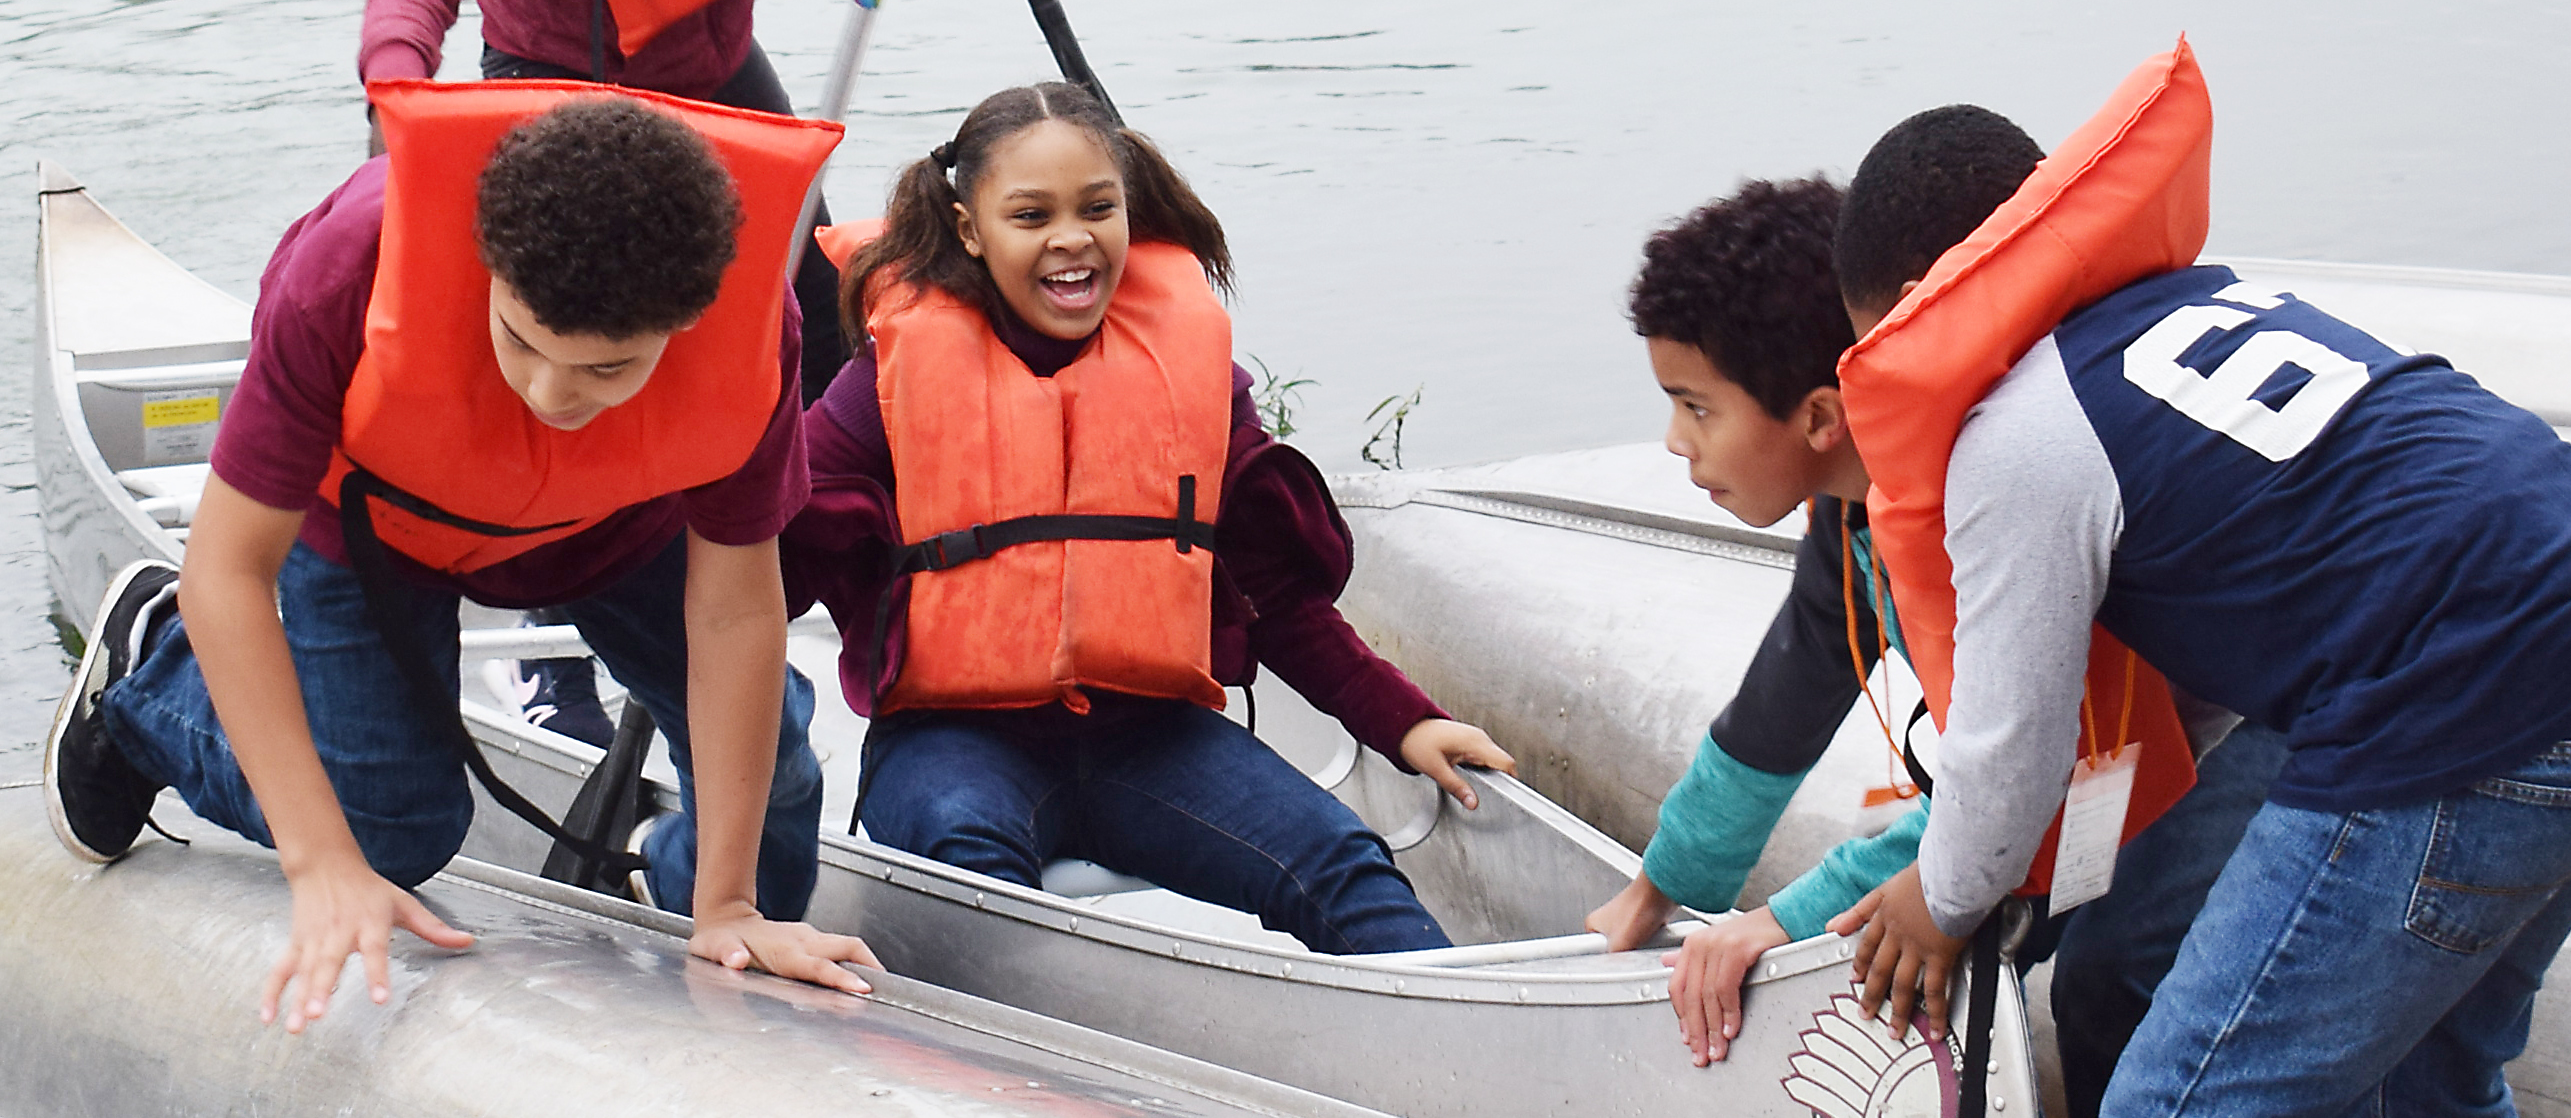 Students wearing life jackets laugh as they push a canoe into water